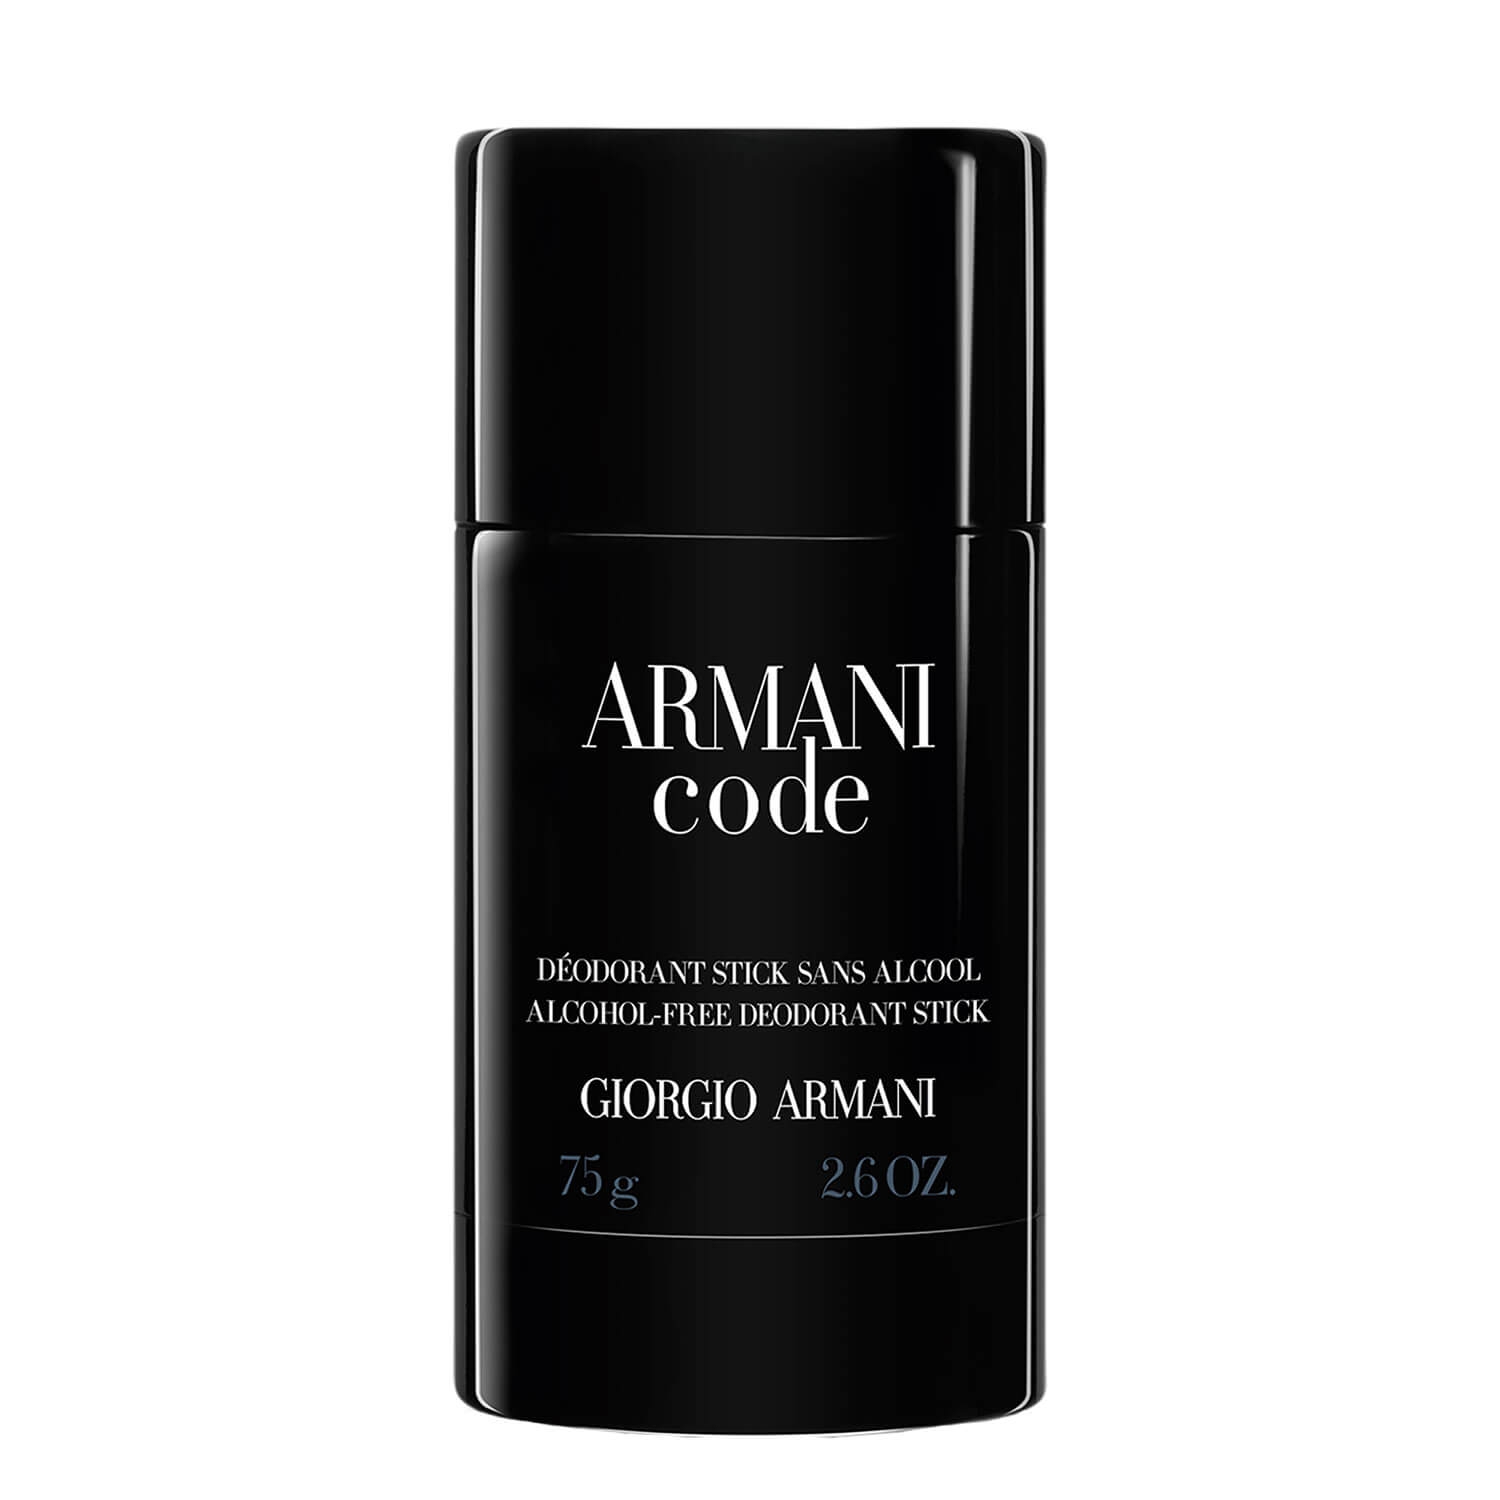 Product image from Armani Code - Deodorant Stick